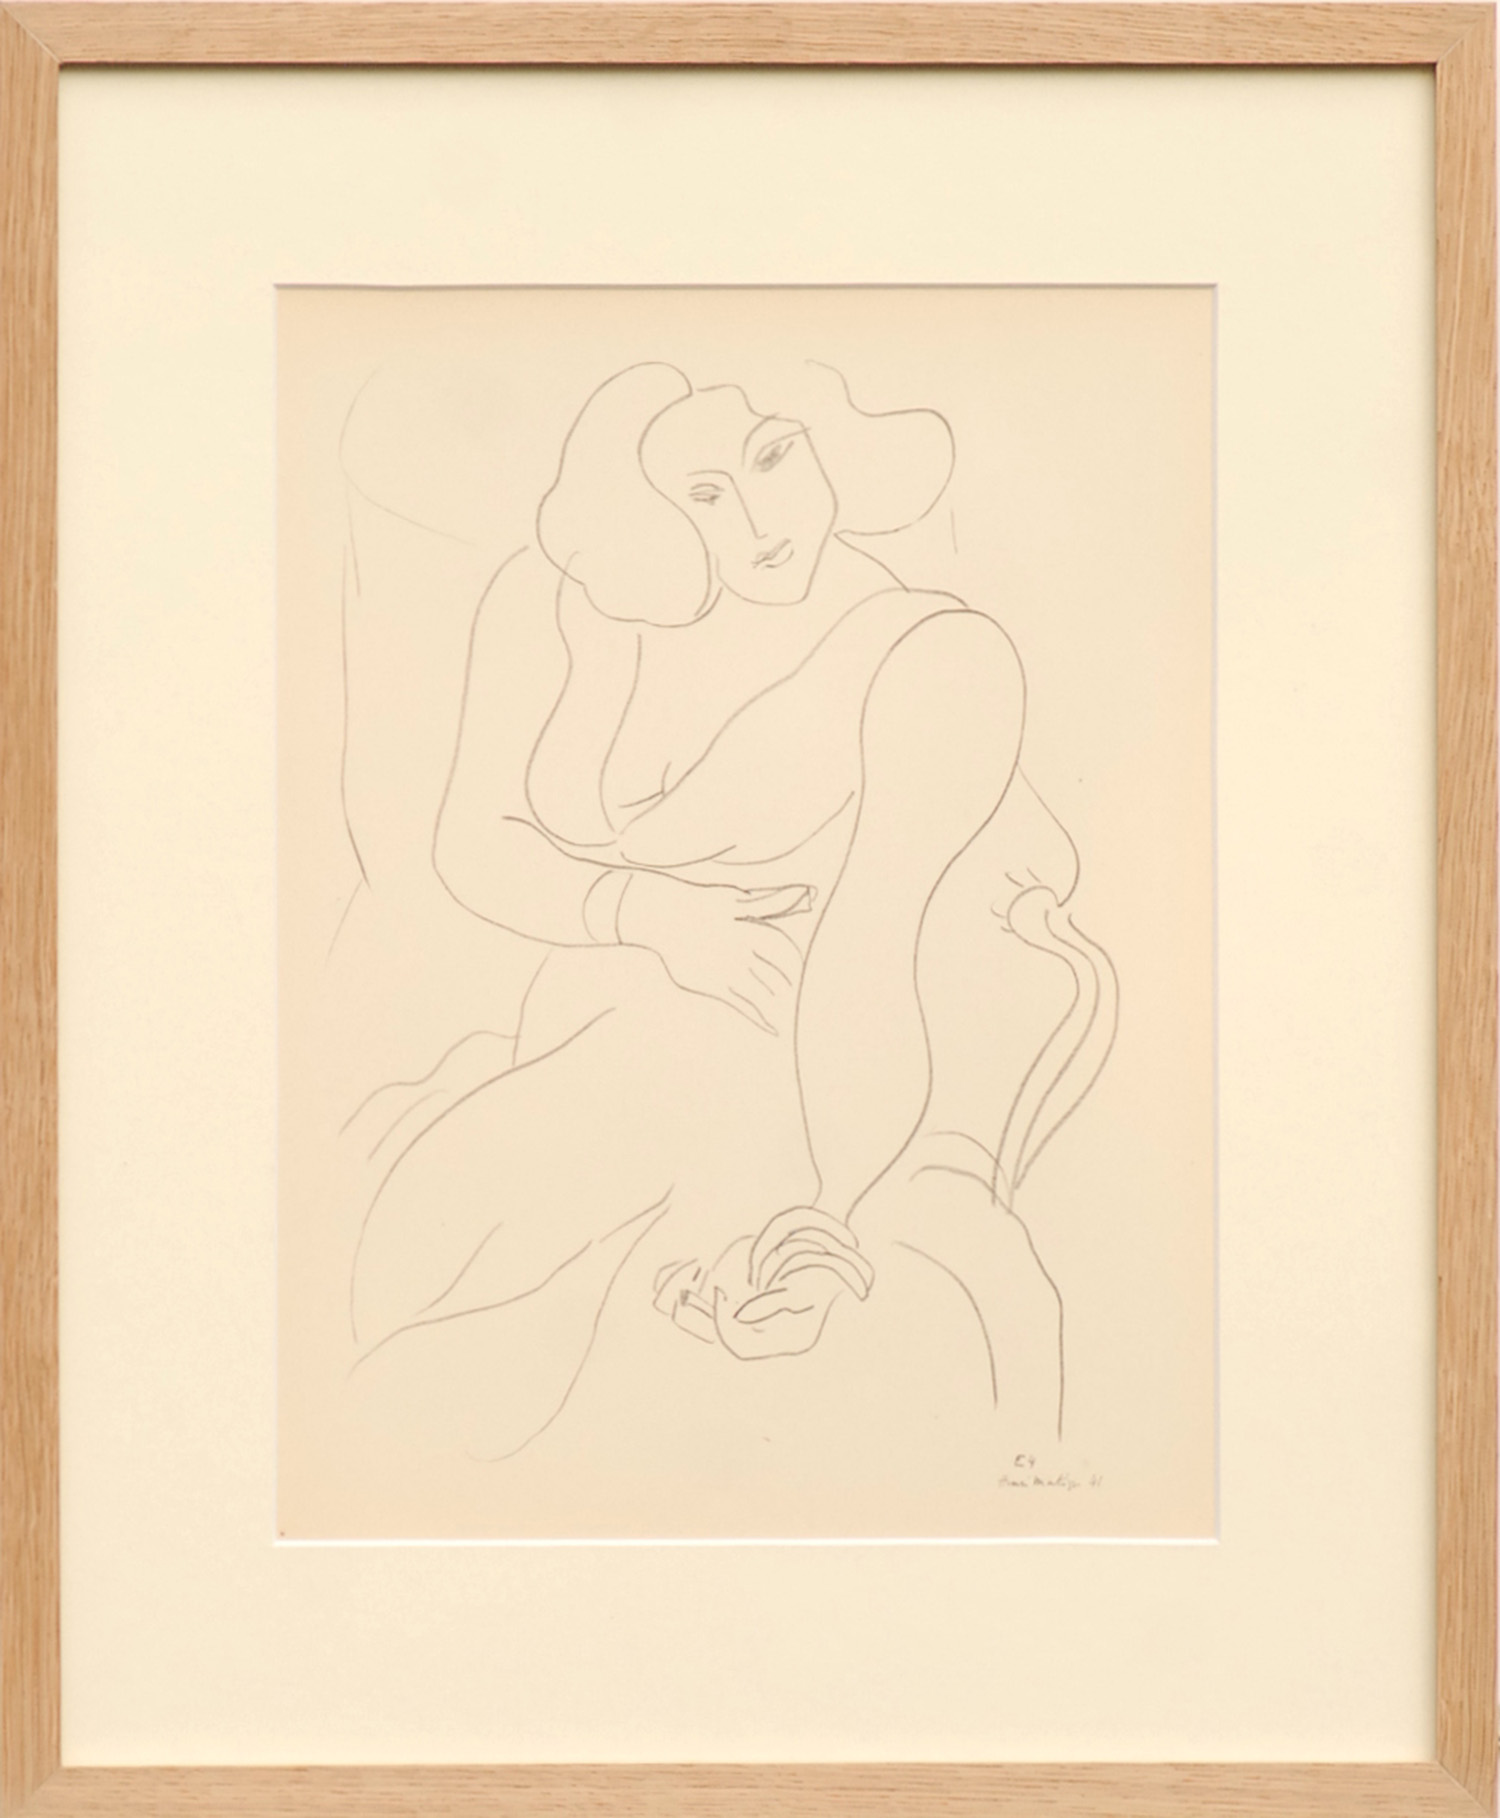 HENRI MATISSE 'Seated woman with cigarette E4', collotype, 1943, limited edition 950,